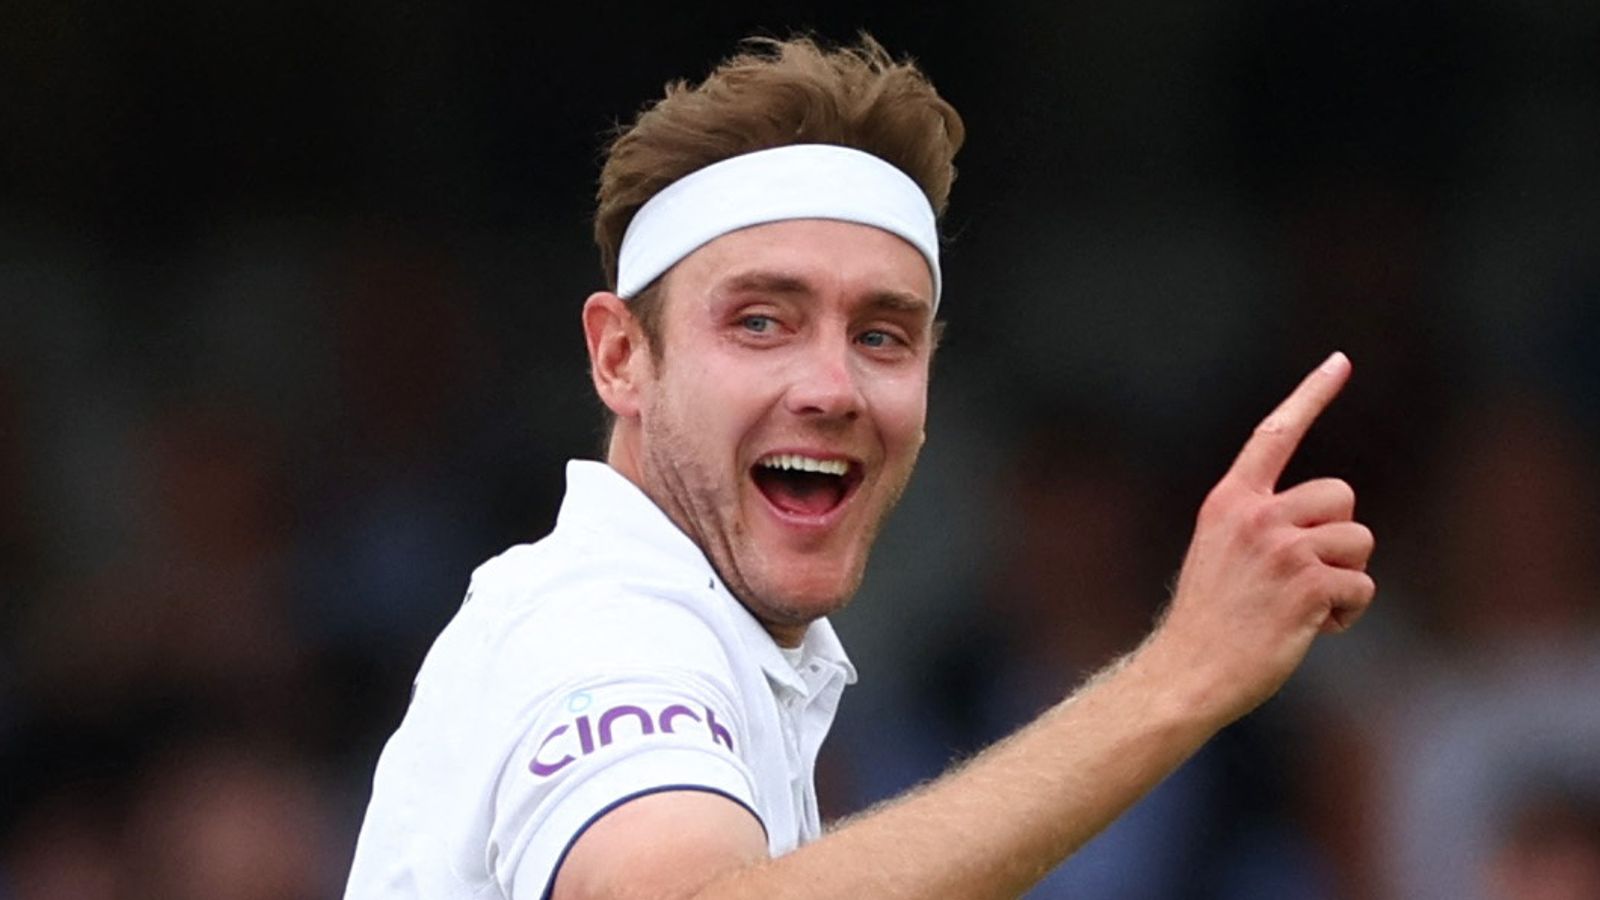 Stuart Broad to retire from cricket after Ashes series